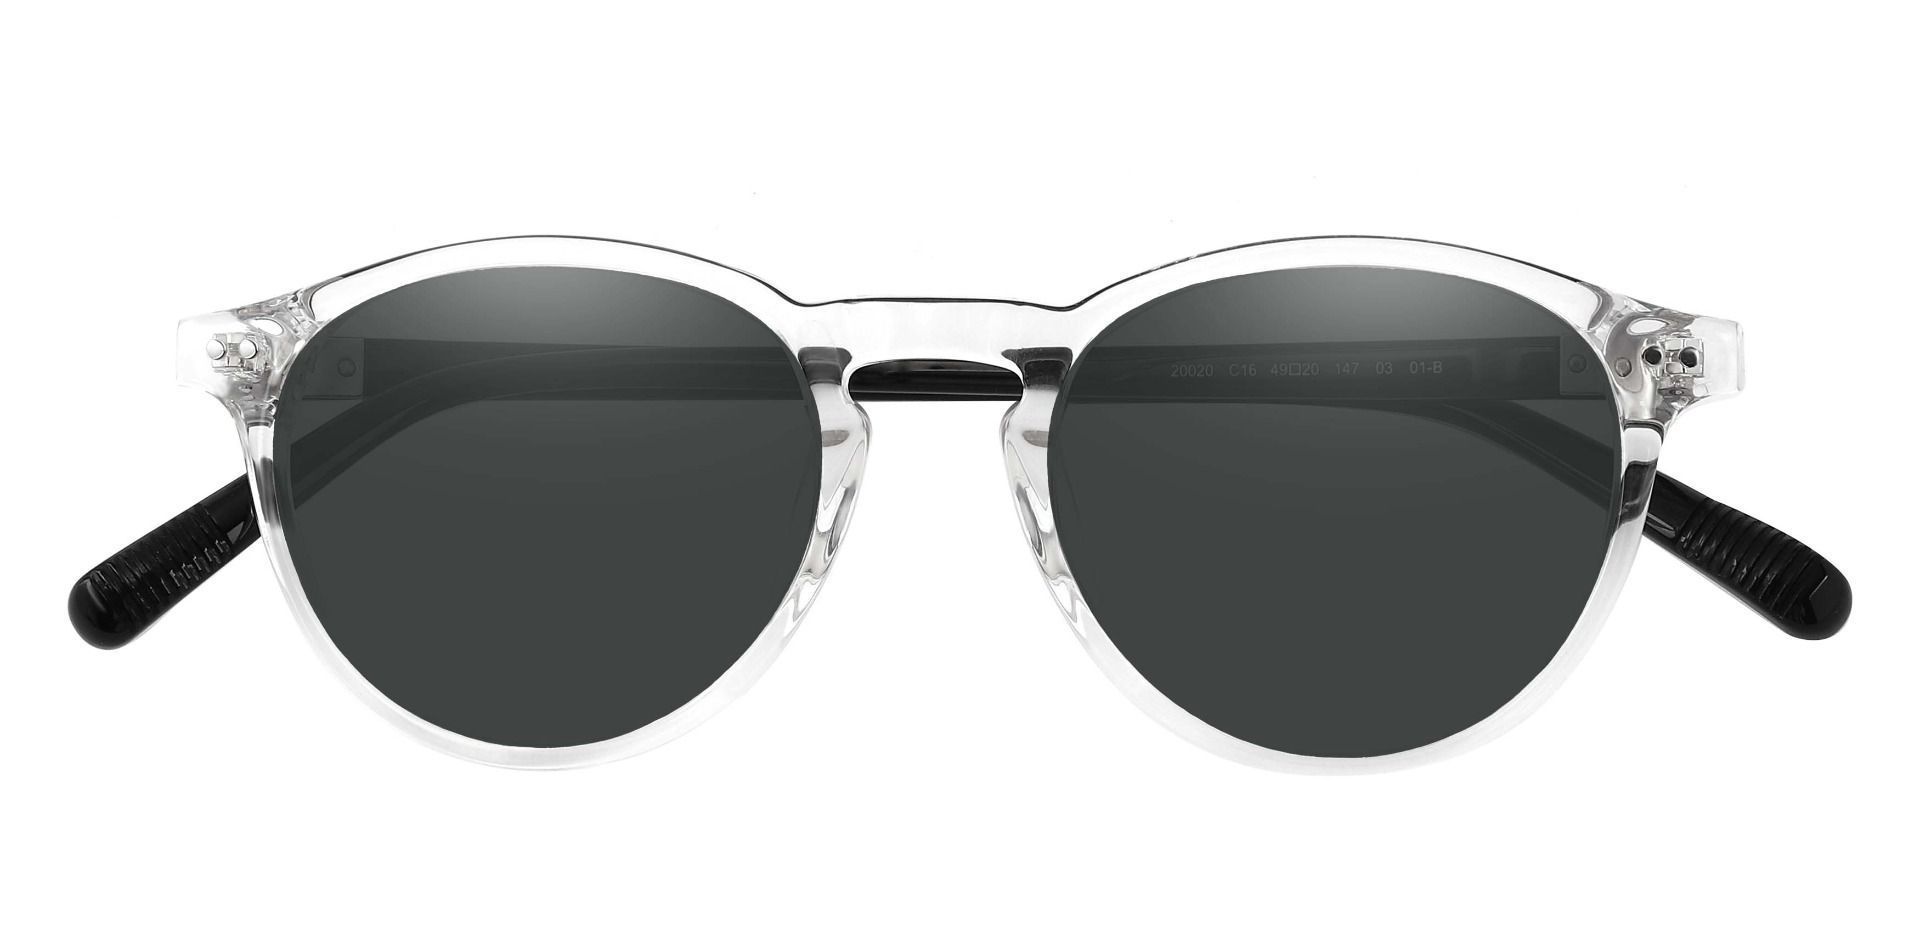 Monarch Oval Lined Bifocal Sunglasses - Clear Frame With Gray Lenses